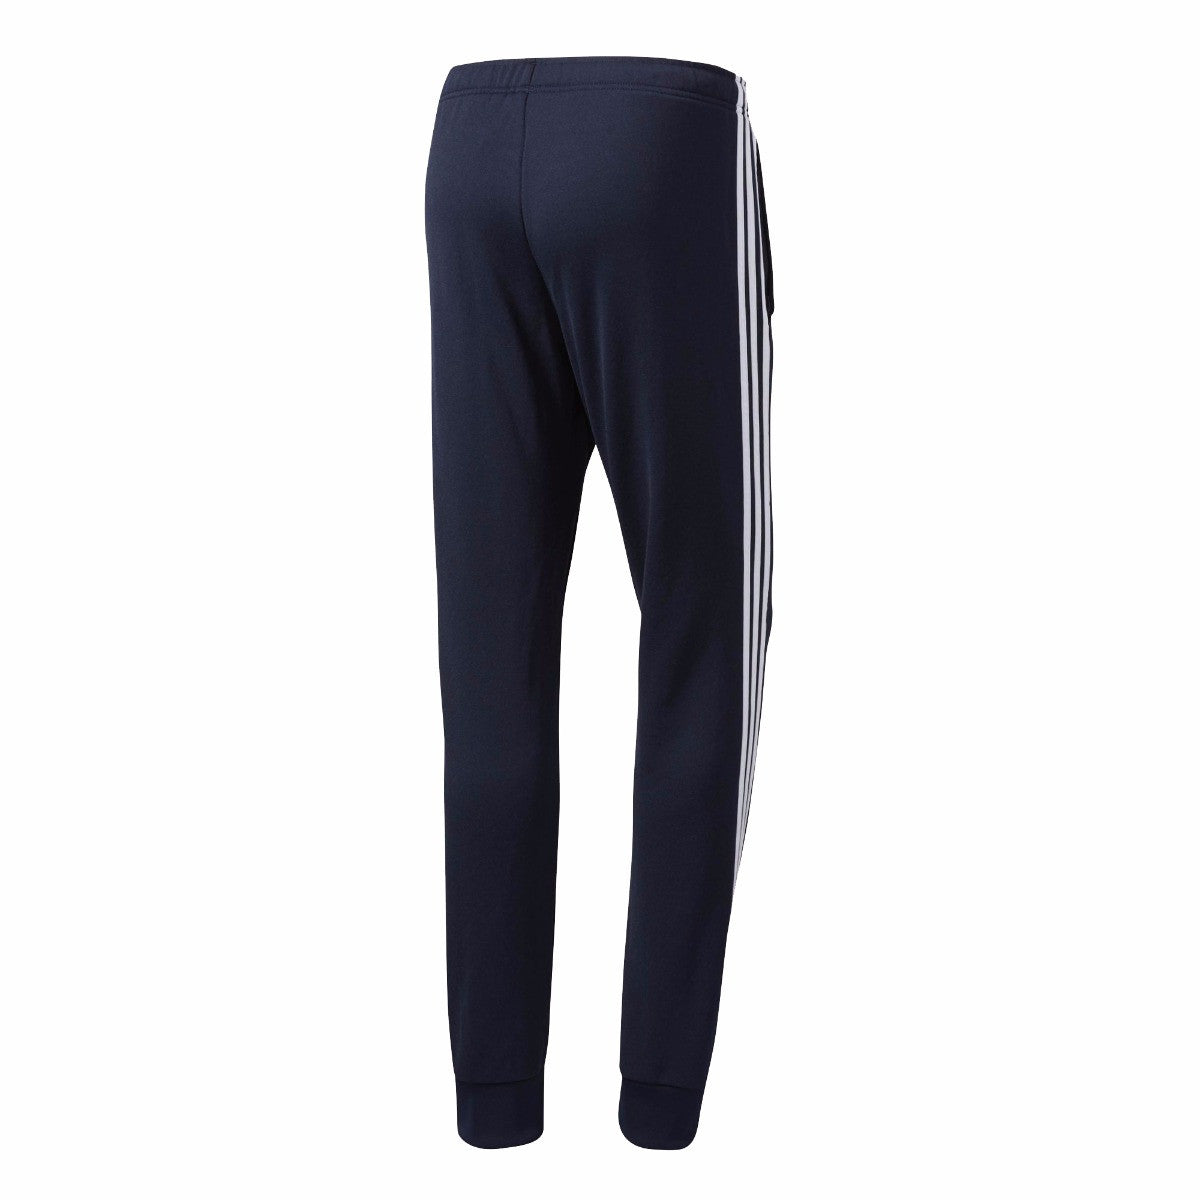 Adidas Originals Superstar Cuffed Track Pants Navy/Red,tracksuit,bottoms